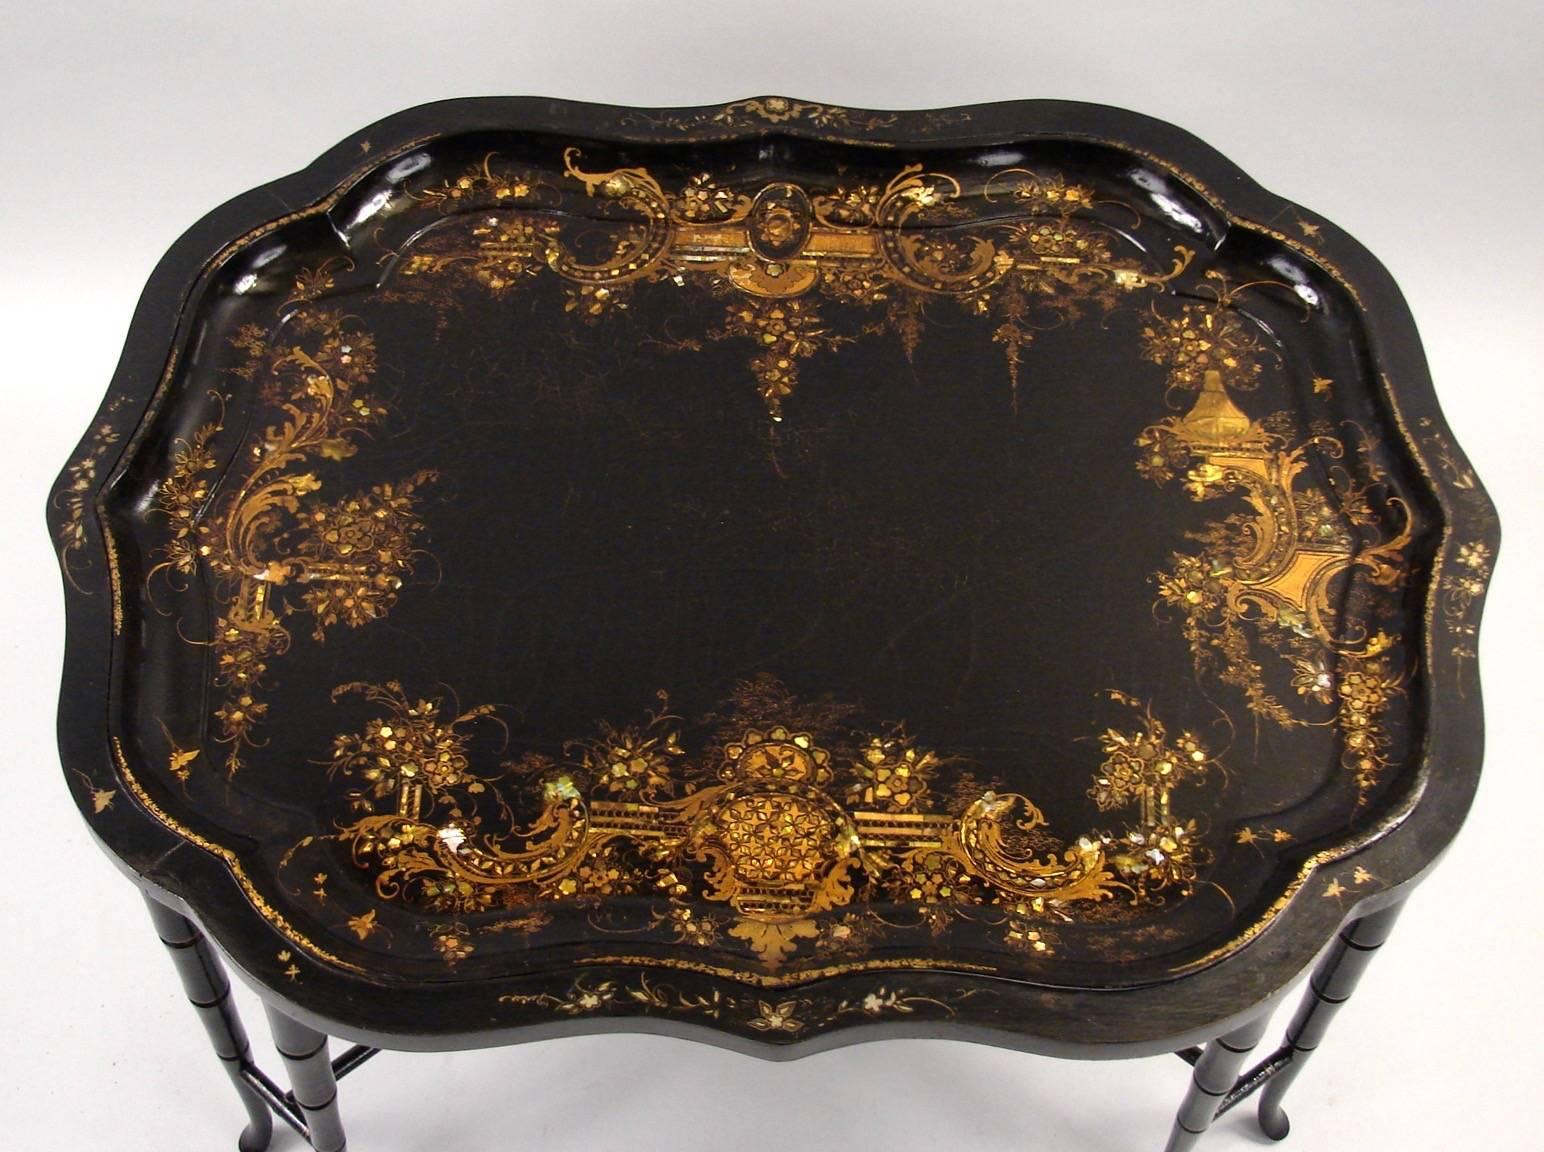 A good quality signed papier mâché scalloped edge tray with elaborate mother-of-pearl gilt heightened inlay signed on the back Jennens and Bettridge makers to the Queen now mounted on a decorated faux bamboo eight legged stand of a later date. The